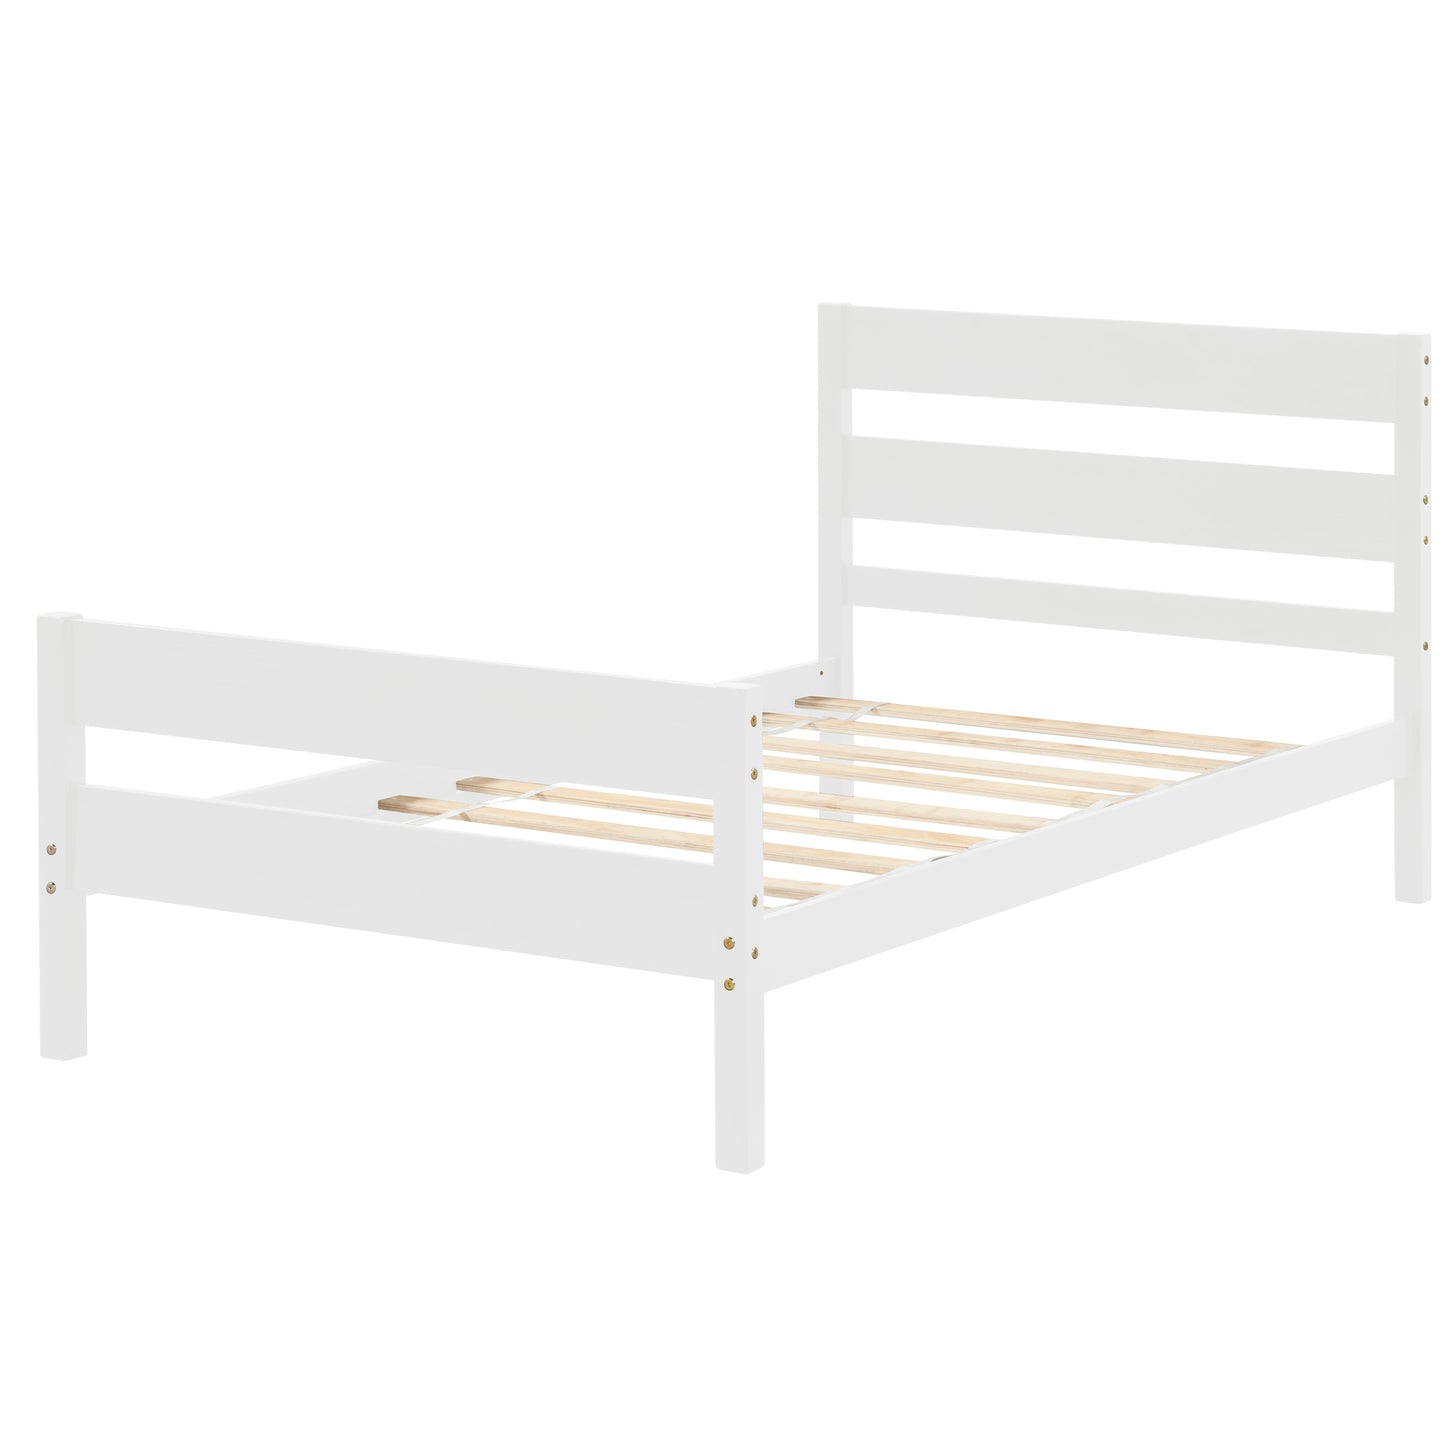 Wood Twin Platform Bed Frame with Headboard and Footboard for Kids Boys Girls Teens Adults, White, LJ798